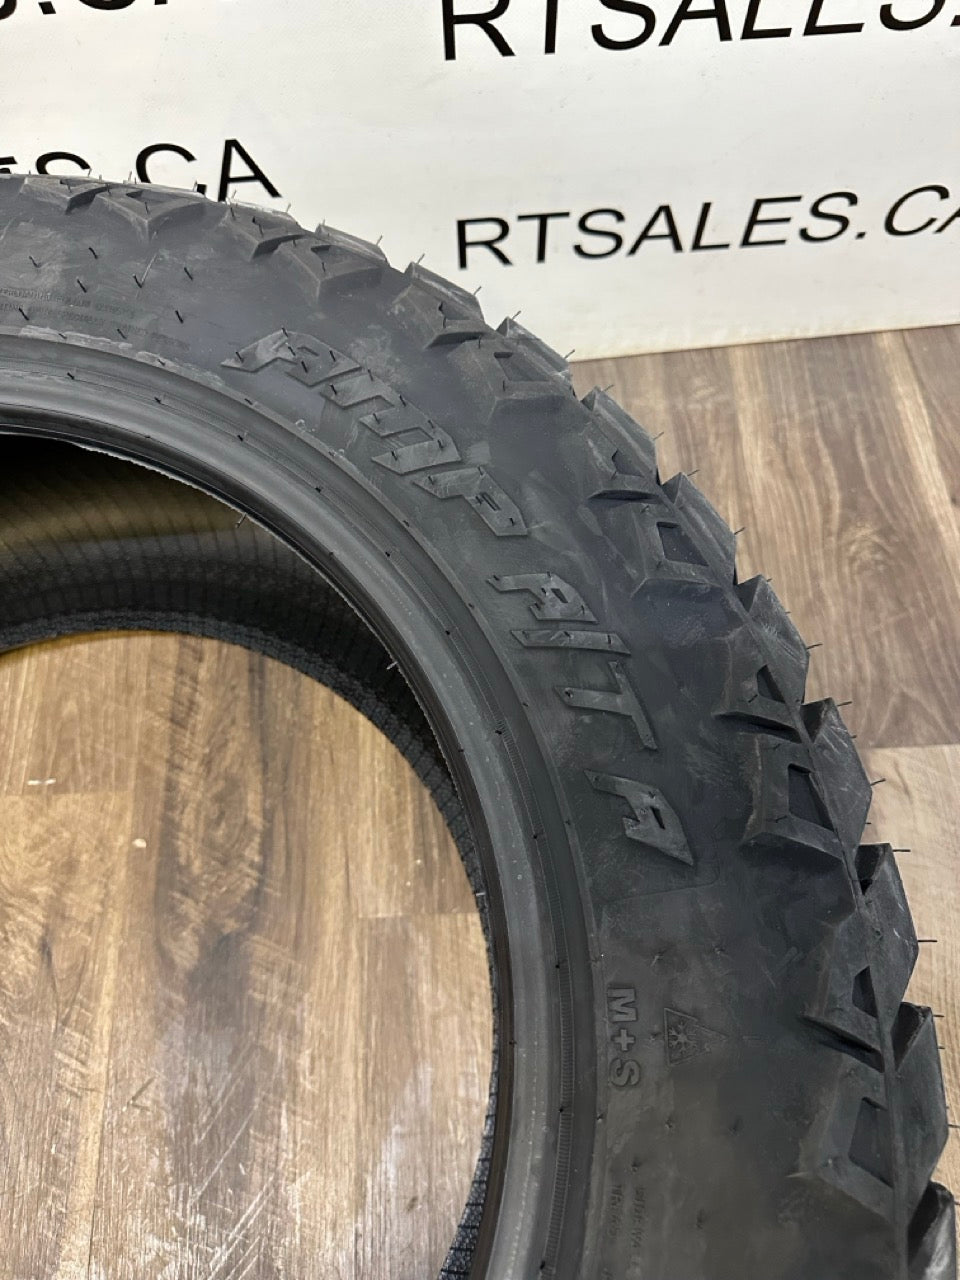 LT 285/55/20 Amp TERRAIN ATTACK A/T E All Weather Tires